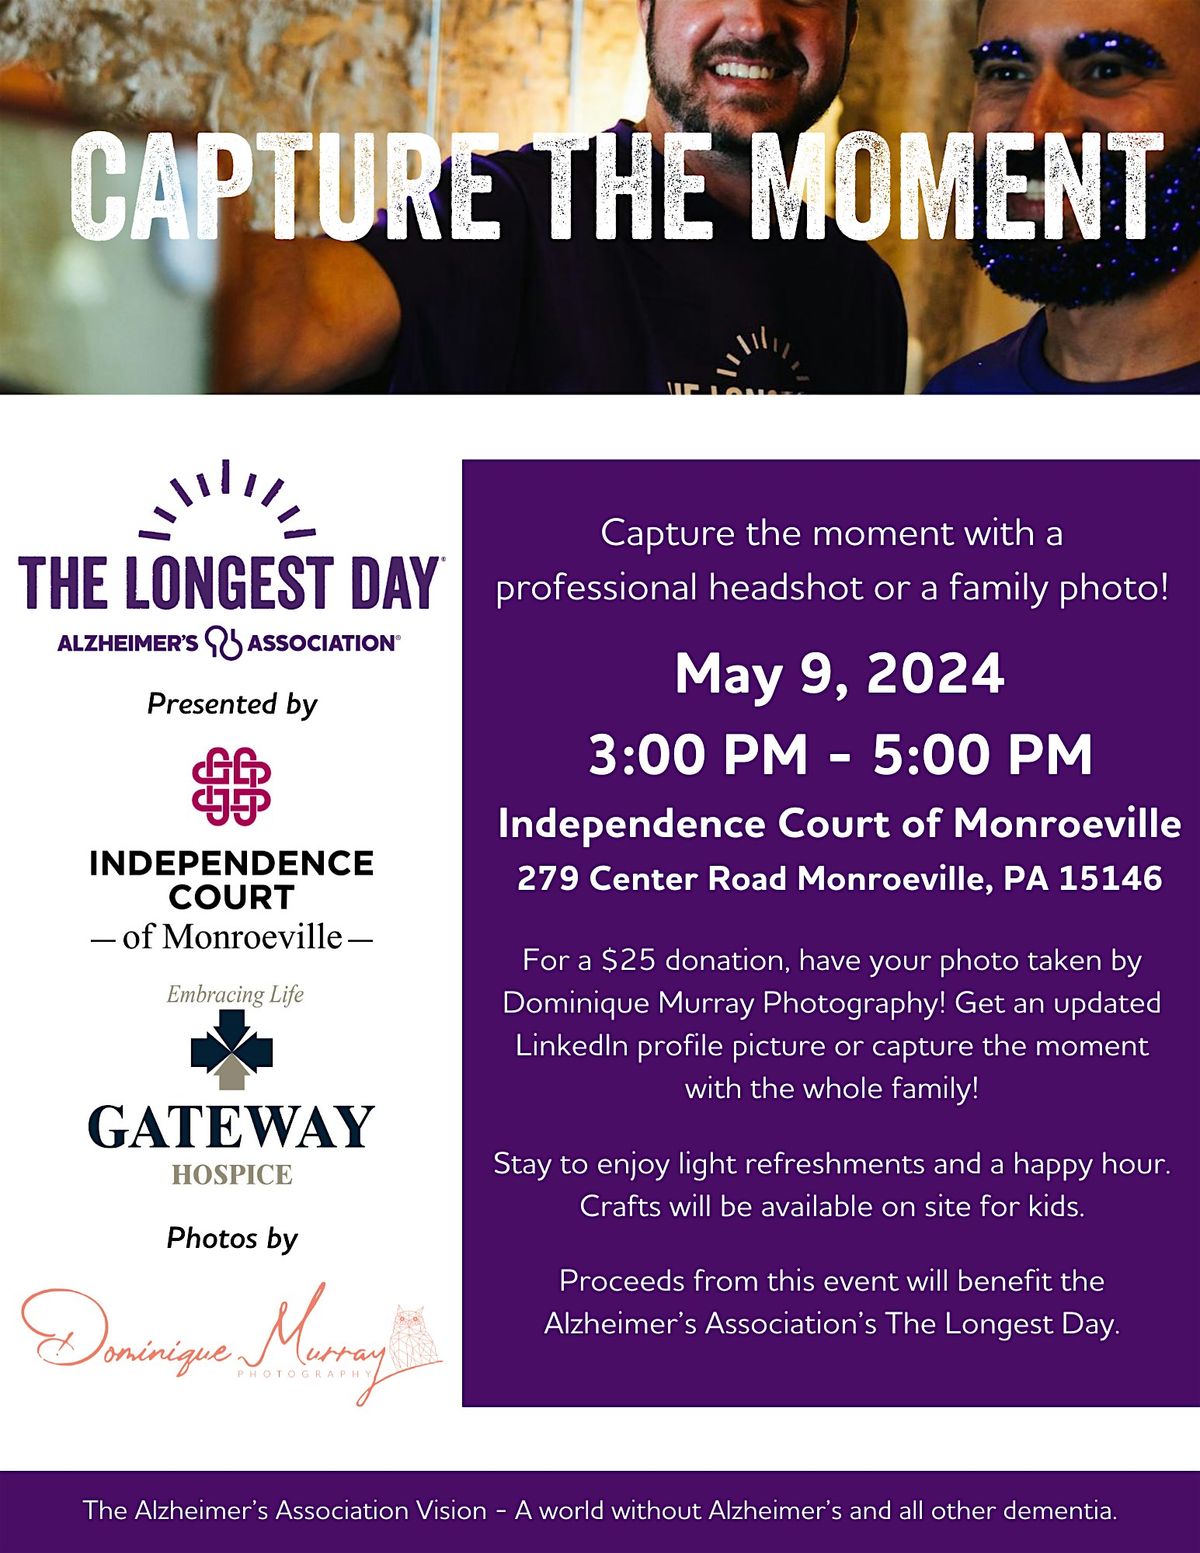 Capture the Moment - The Longest Day